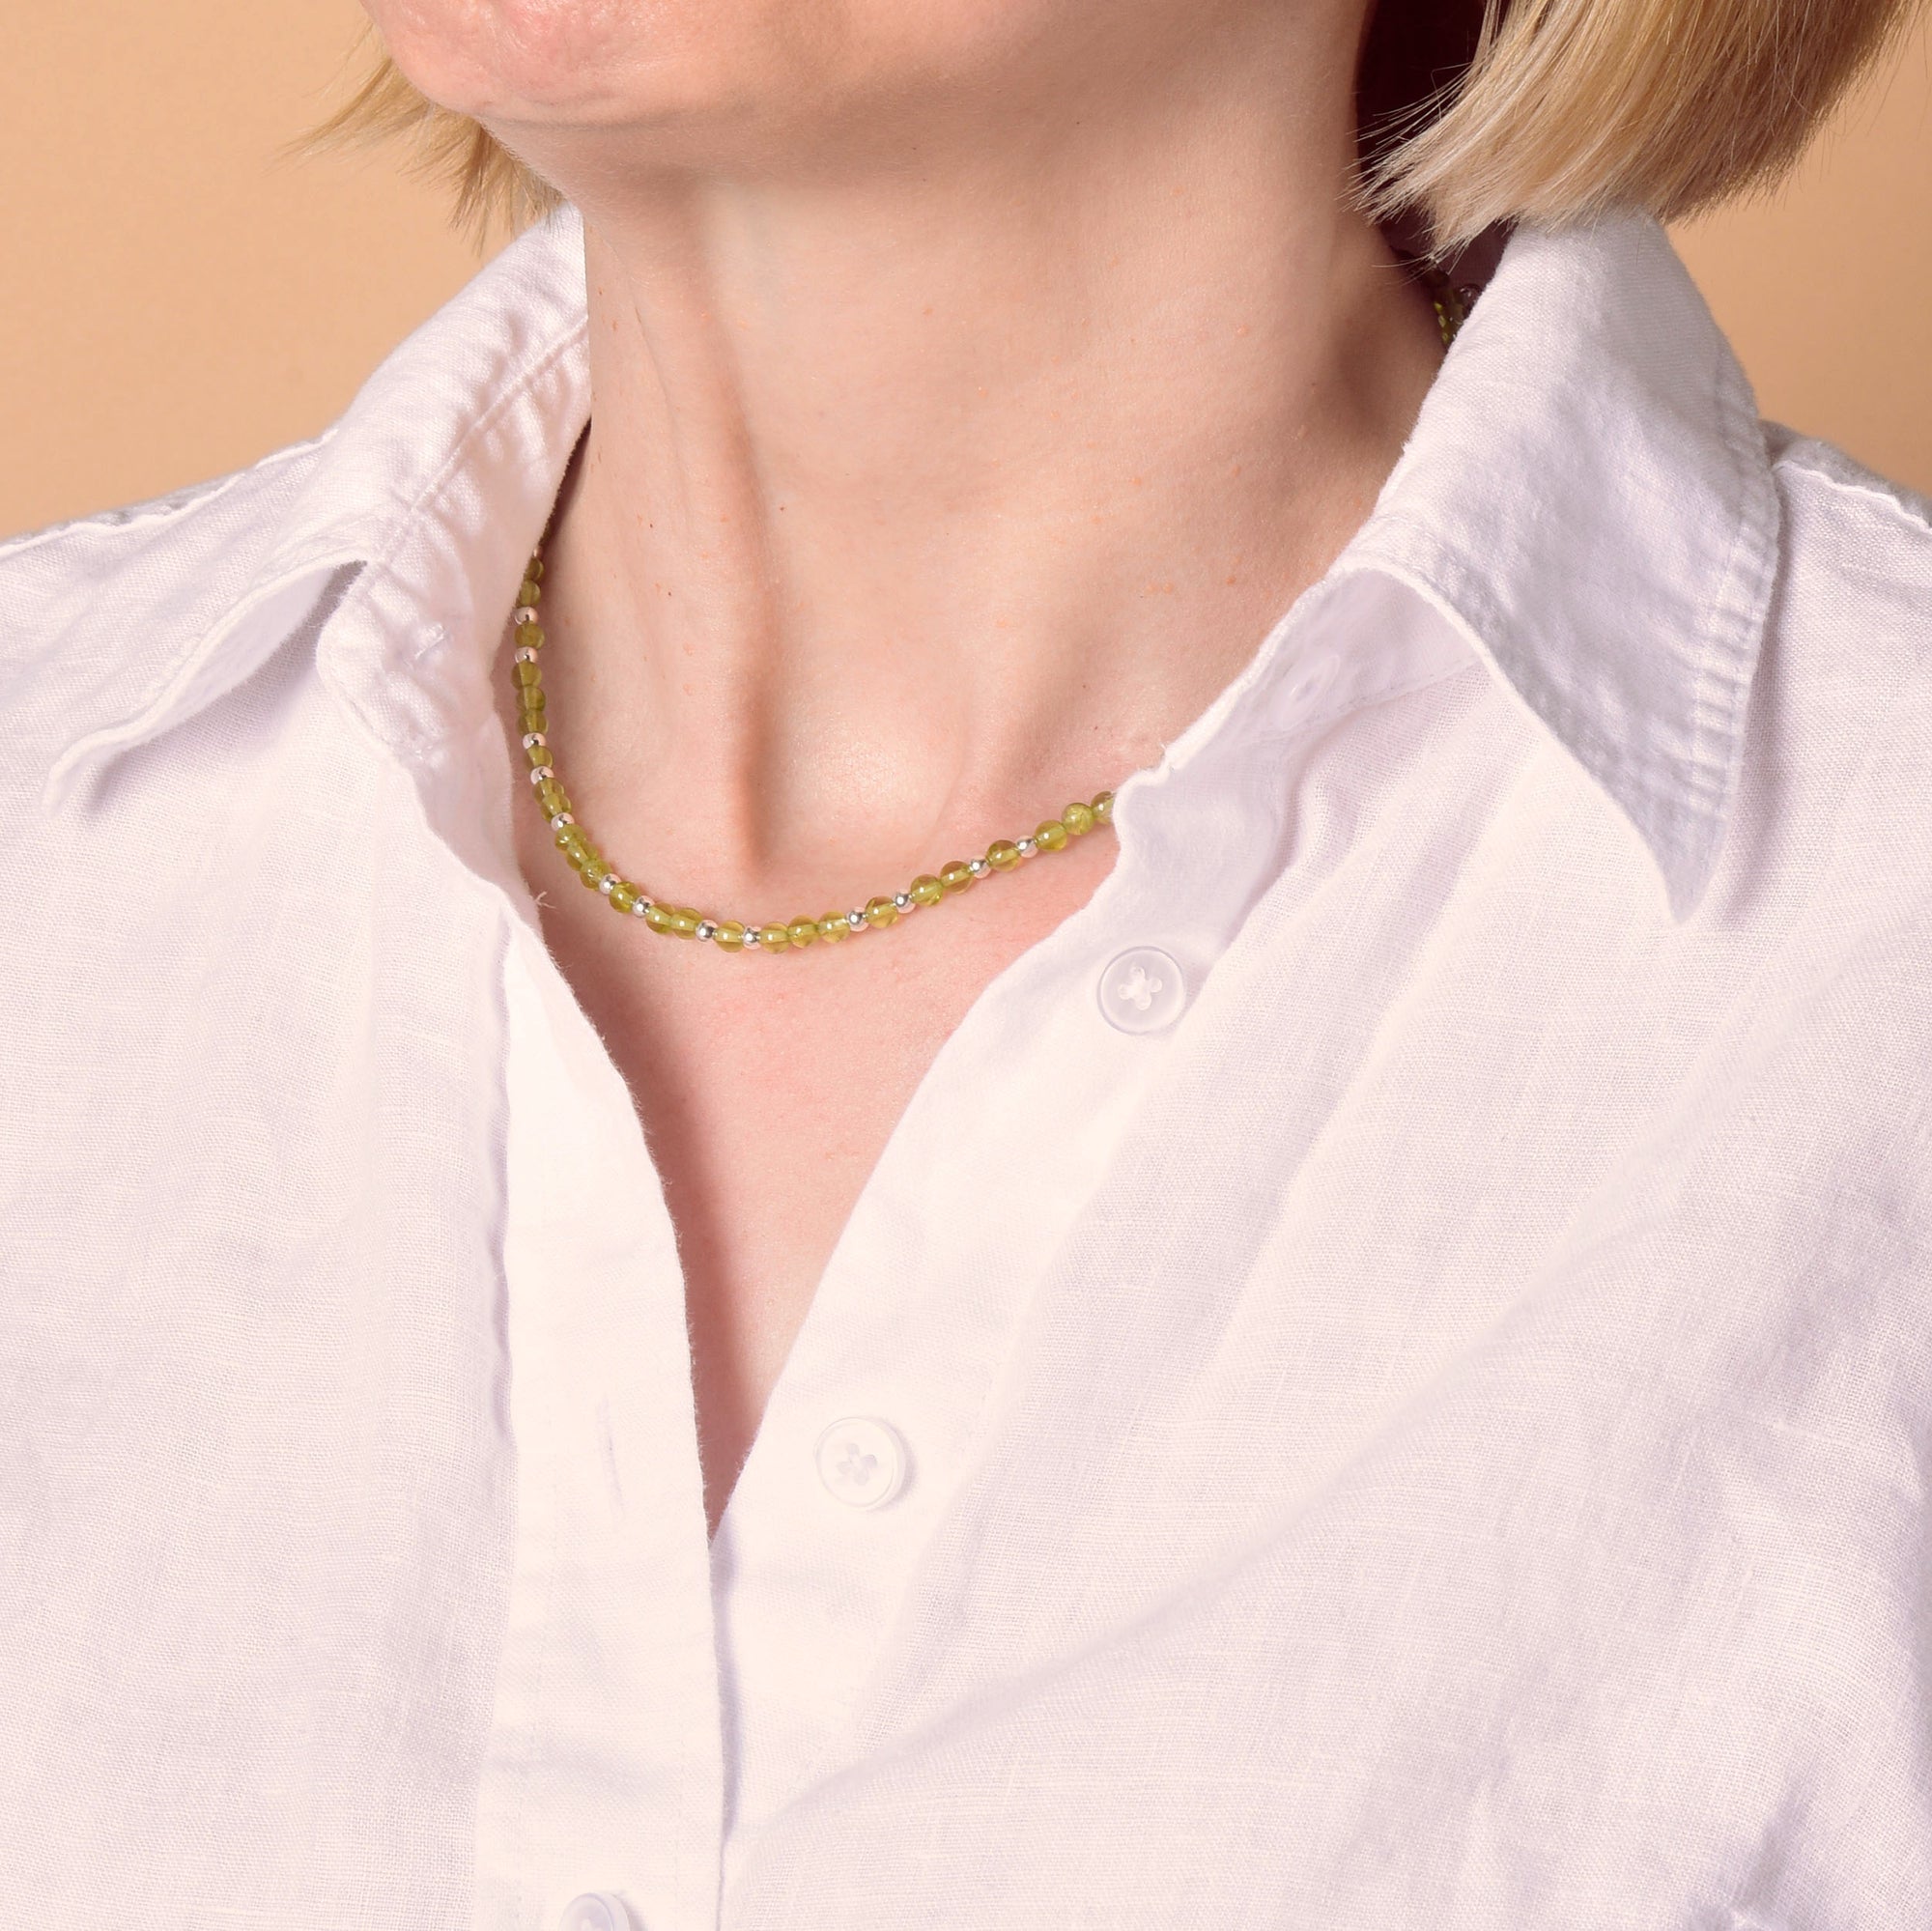 Lady in white shirt with peridot necklace